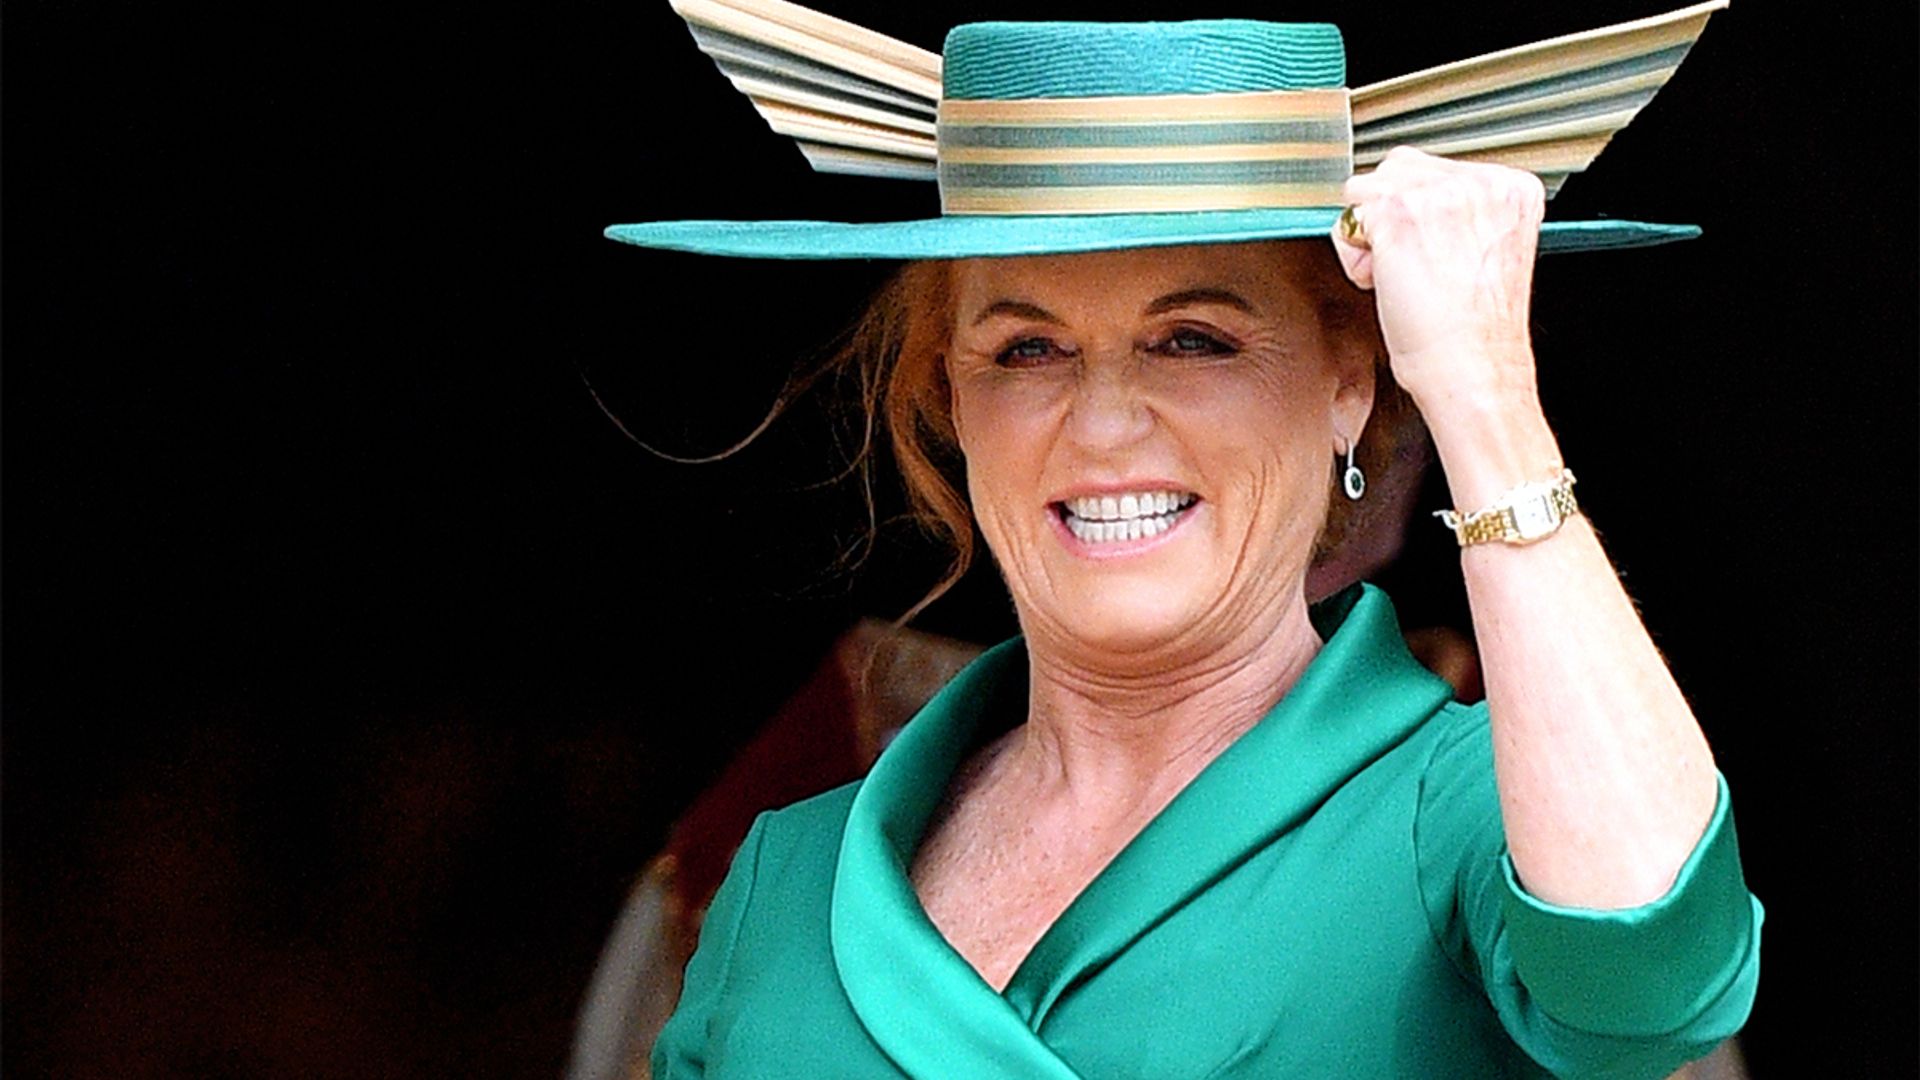 Sarah Ferguson wows in shiny green suit and hat